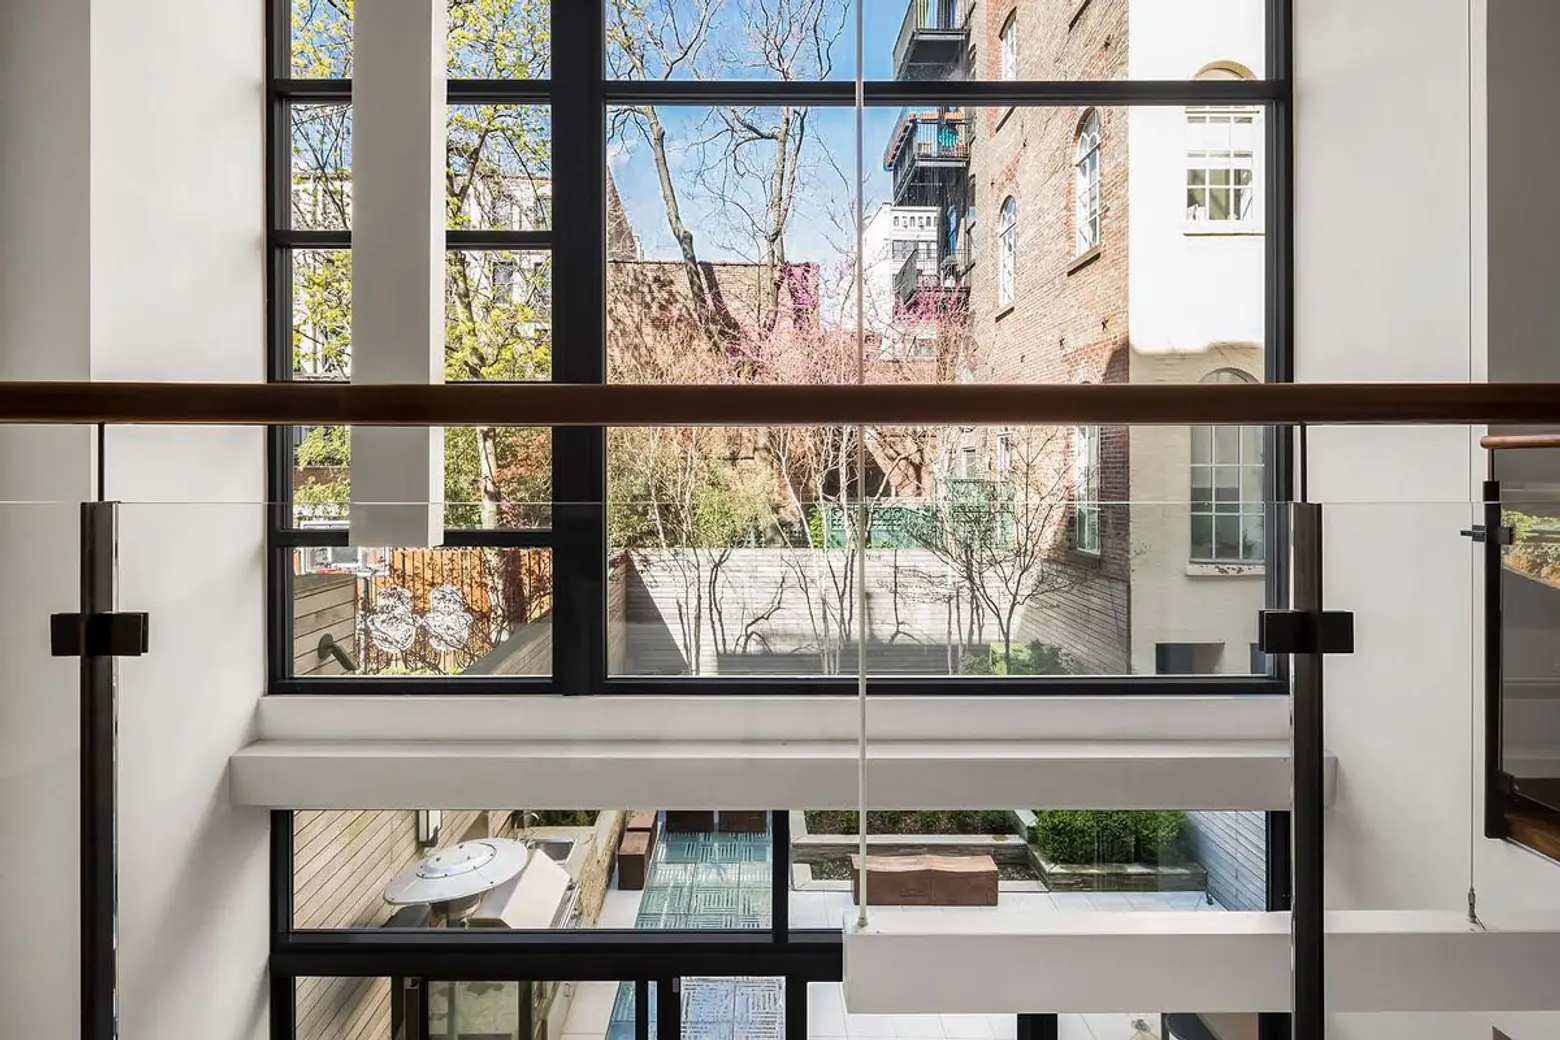 109 waverly place, greenwich village, cool listings, lap pool, townhouse